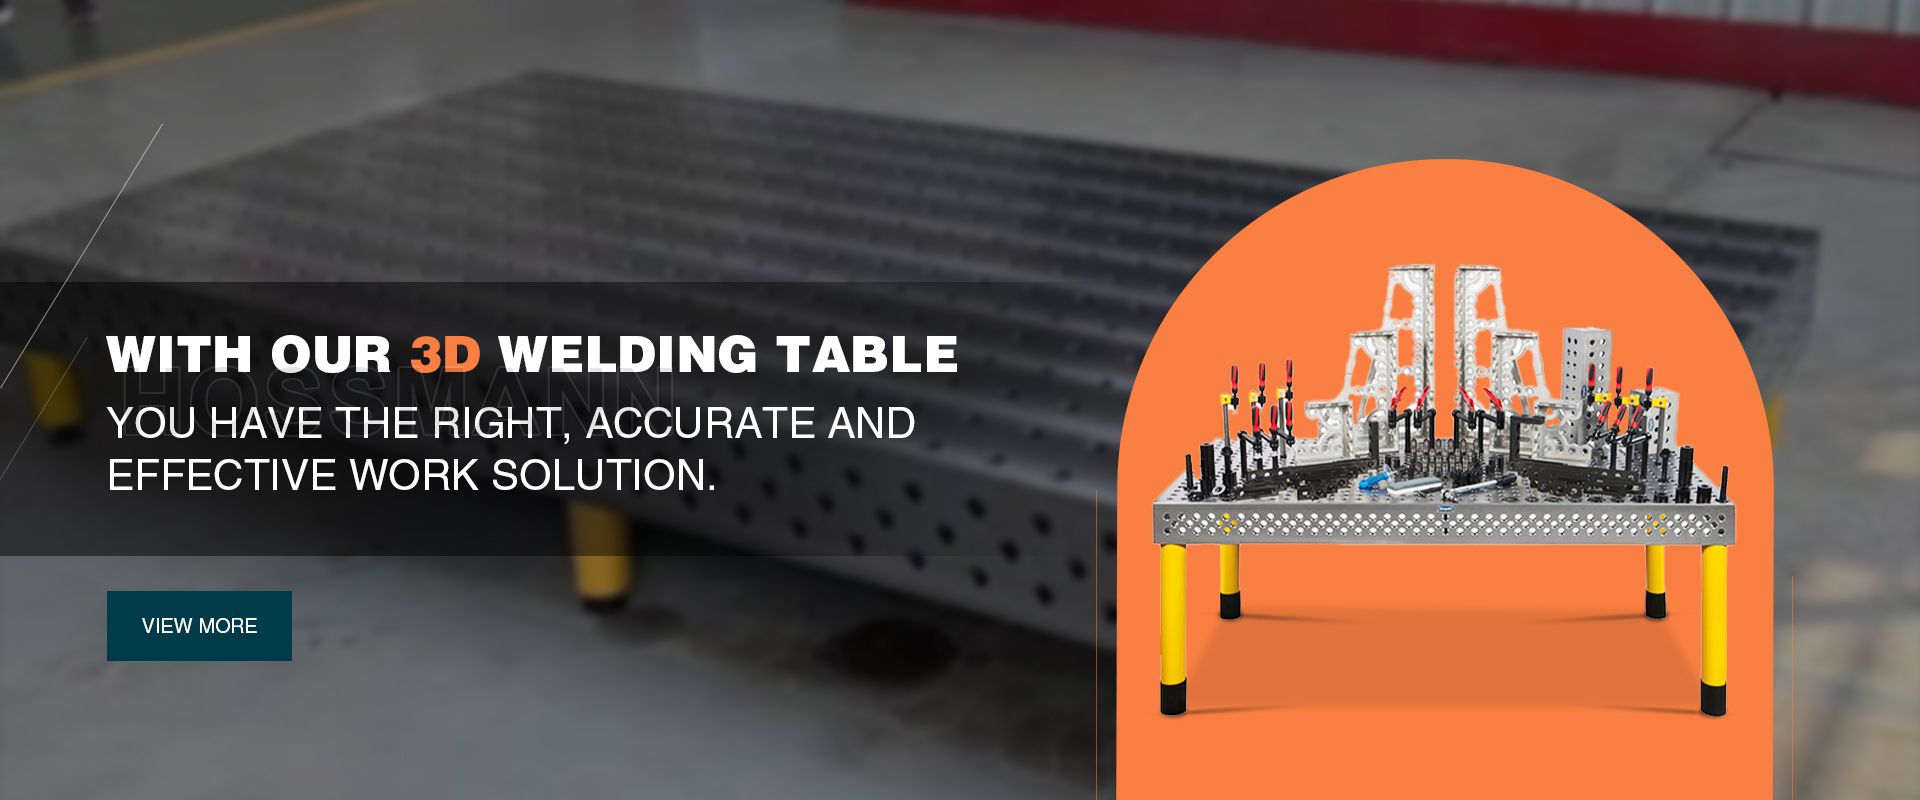 3D Welding Table With Slots